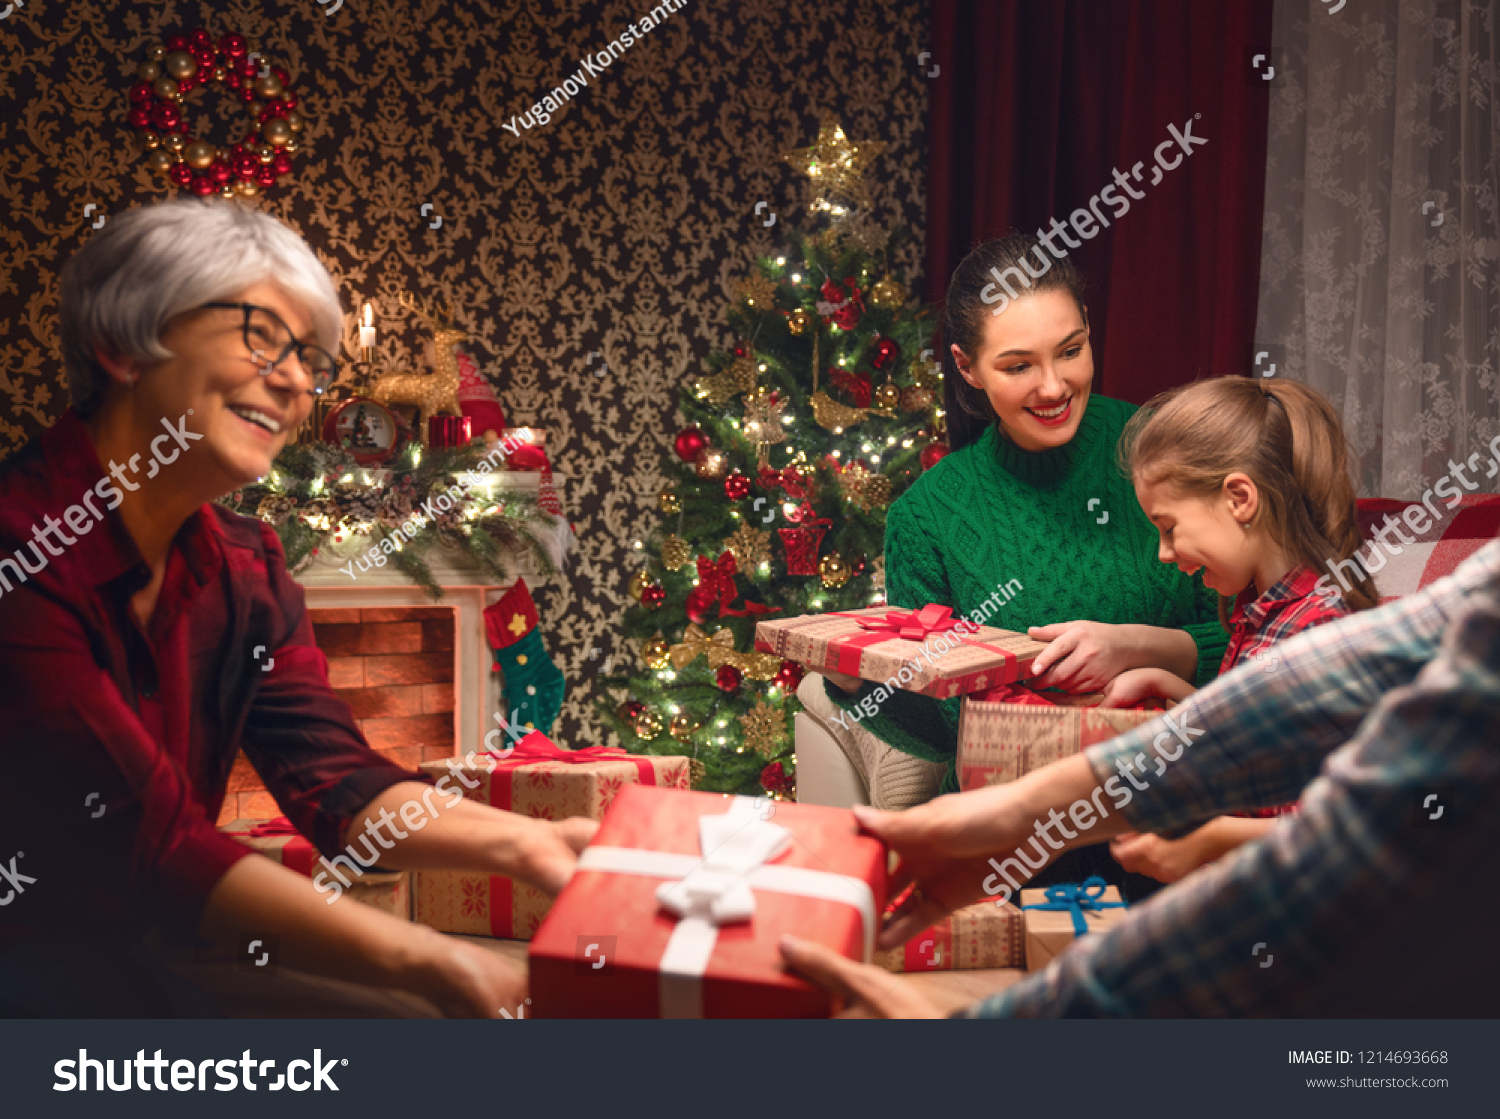 Merry Christmas and Happy Holidays! Grandma, mum, dad and child exchanging gifts. Parents and daughter having fun near tree indoors. Loving family with presents in room. #1214693668